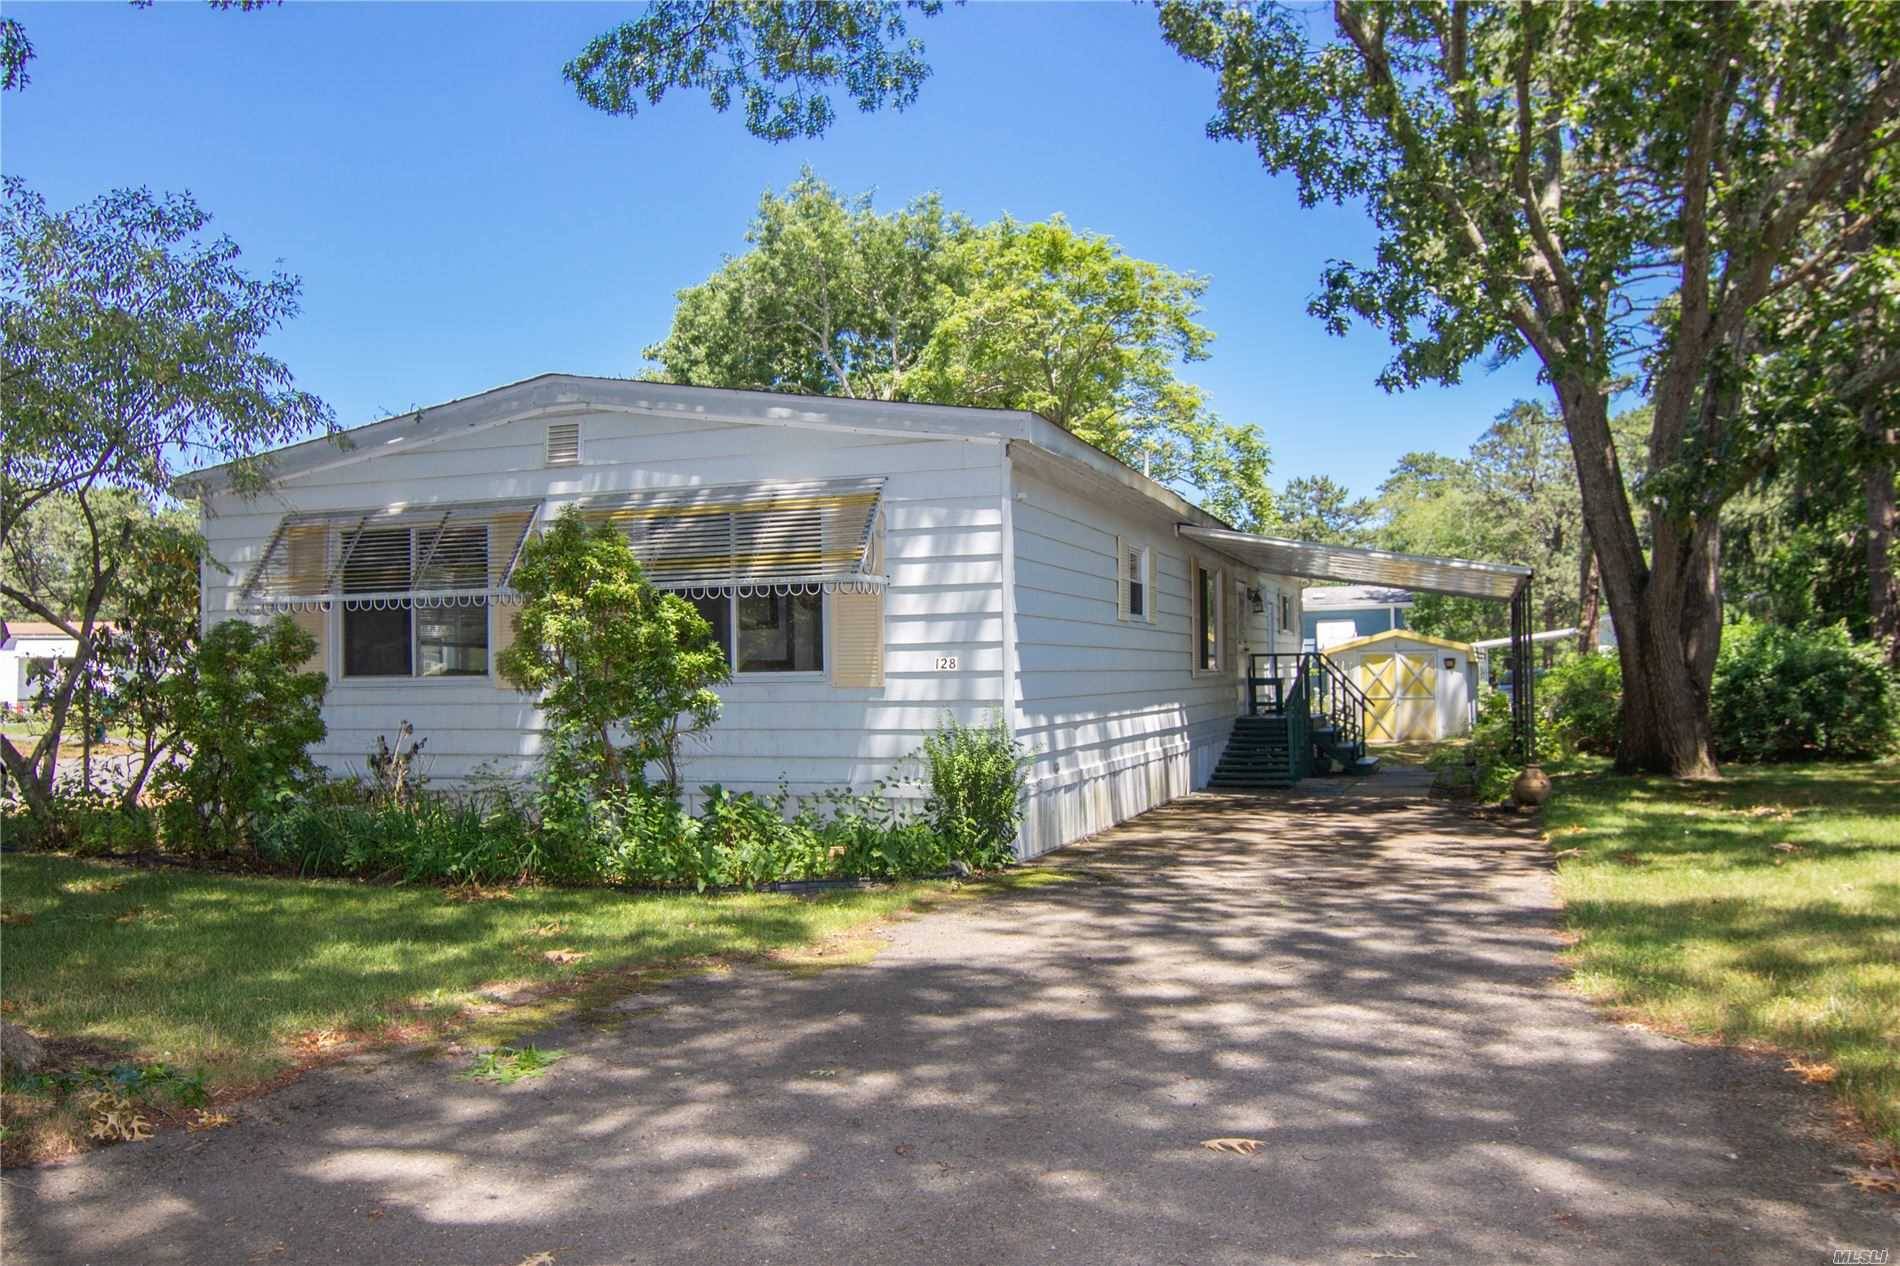 As featured in Newsday ! Large double wide.